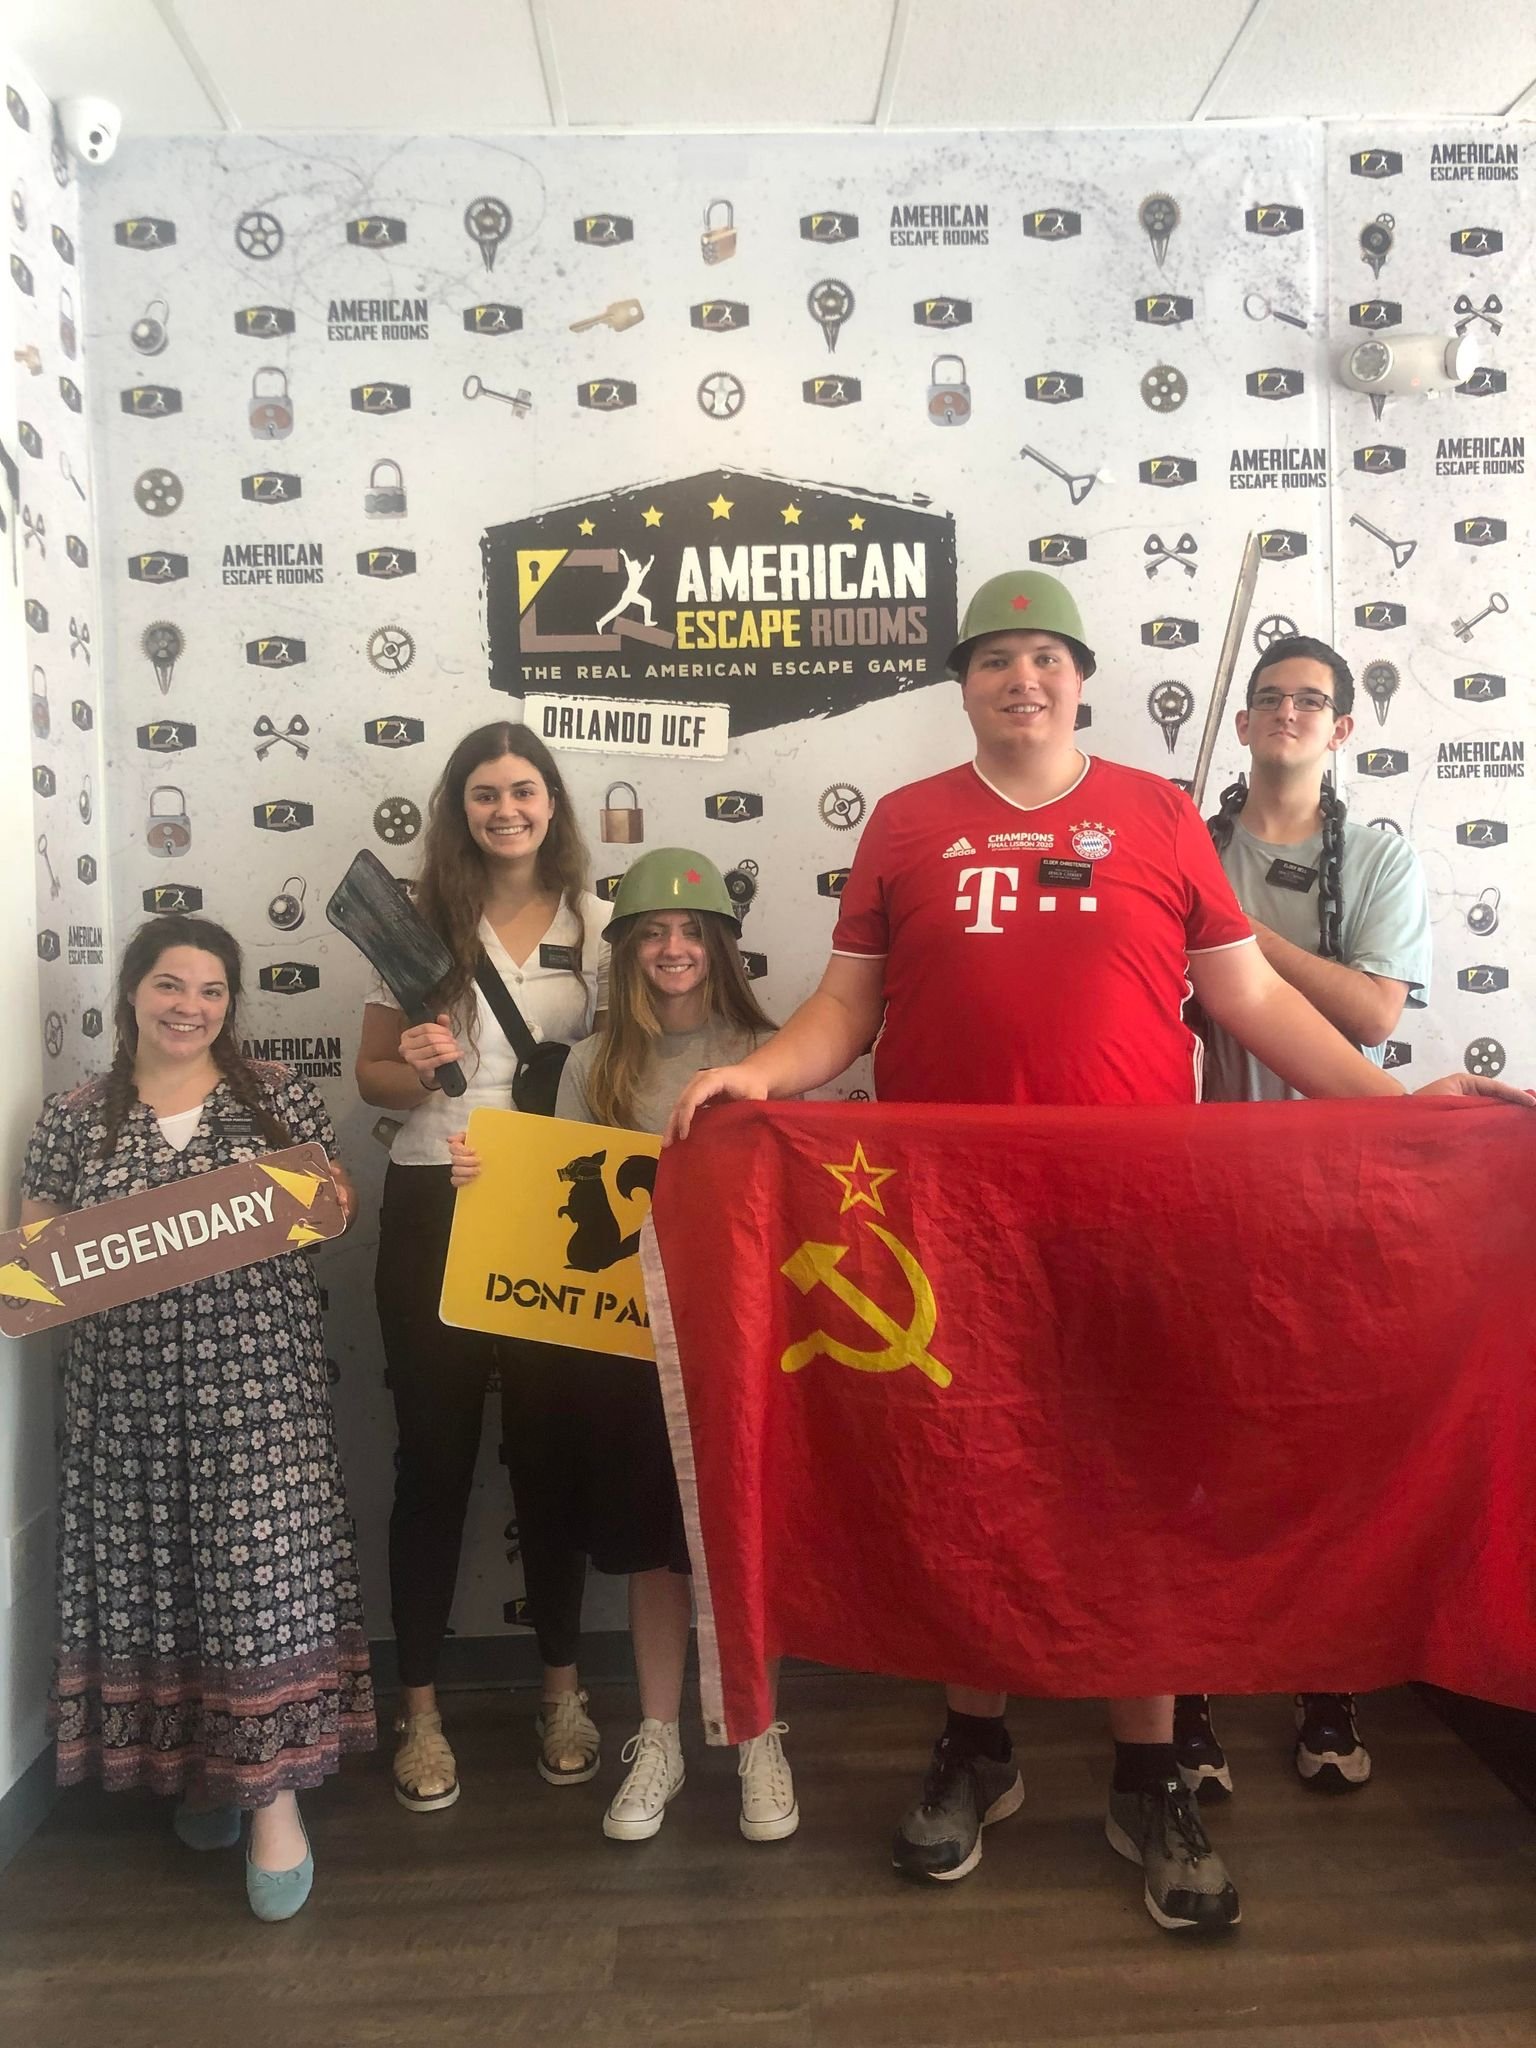 Team University Park played the Cold War Crisis - Orlando and finished the game with 3 minutes 12 seconds left. Congratulations! Well done!